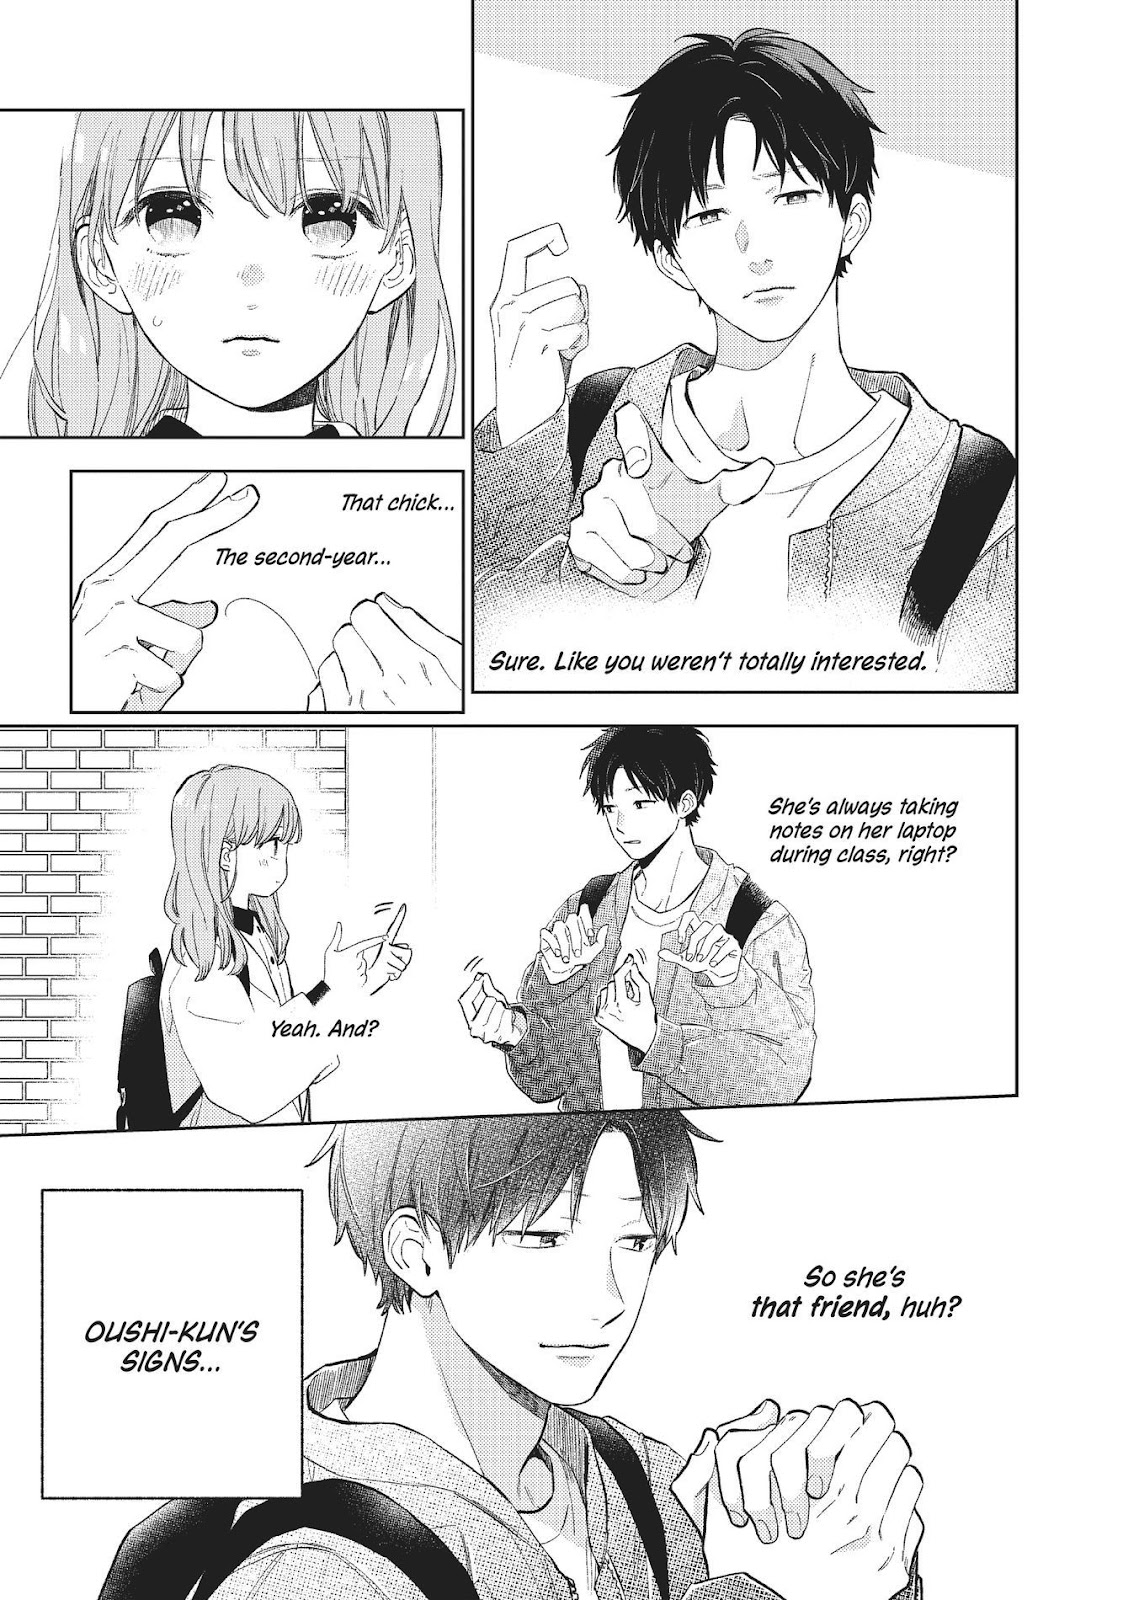 A Sign of Affection, Chapter 3 - A Sign of Affection Manga Online